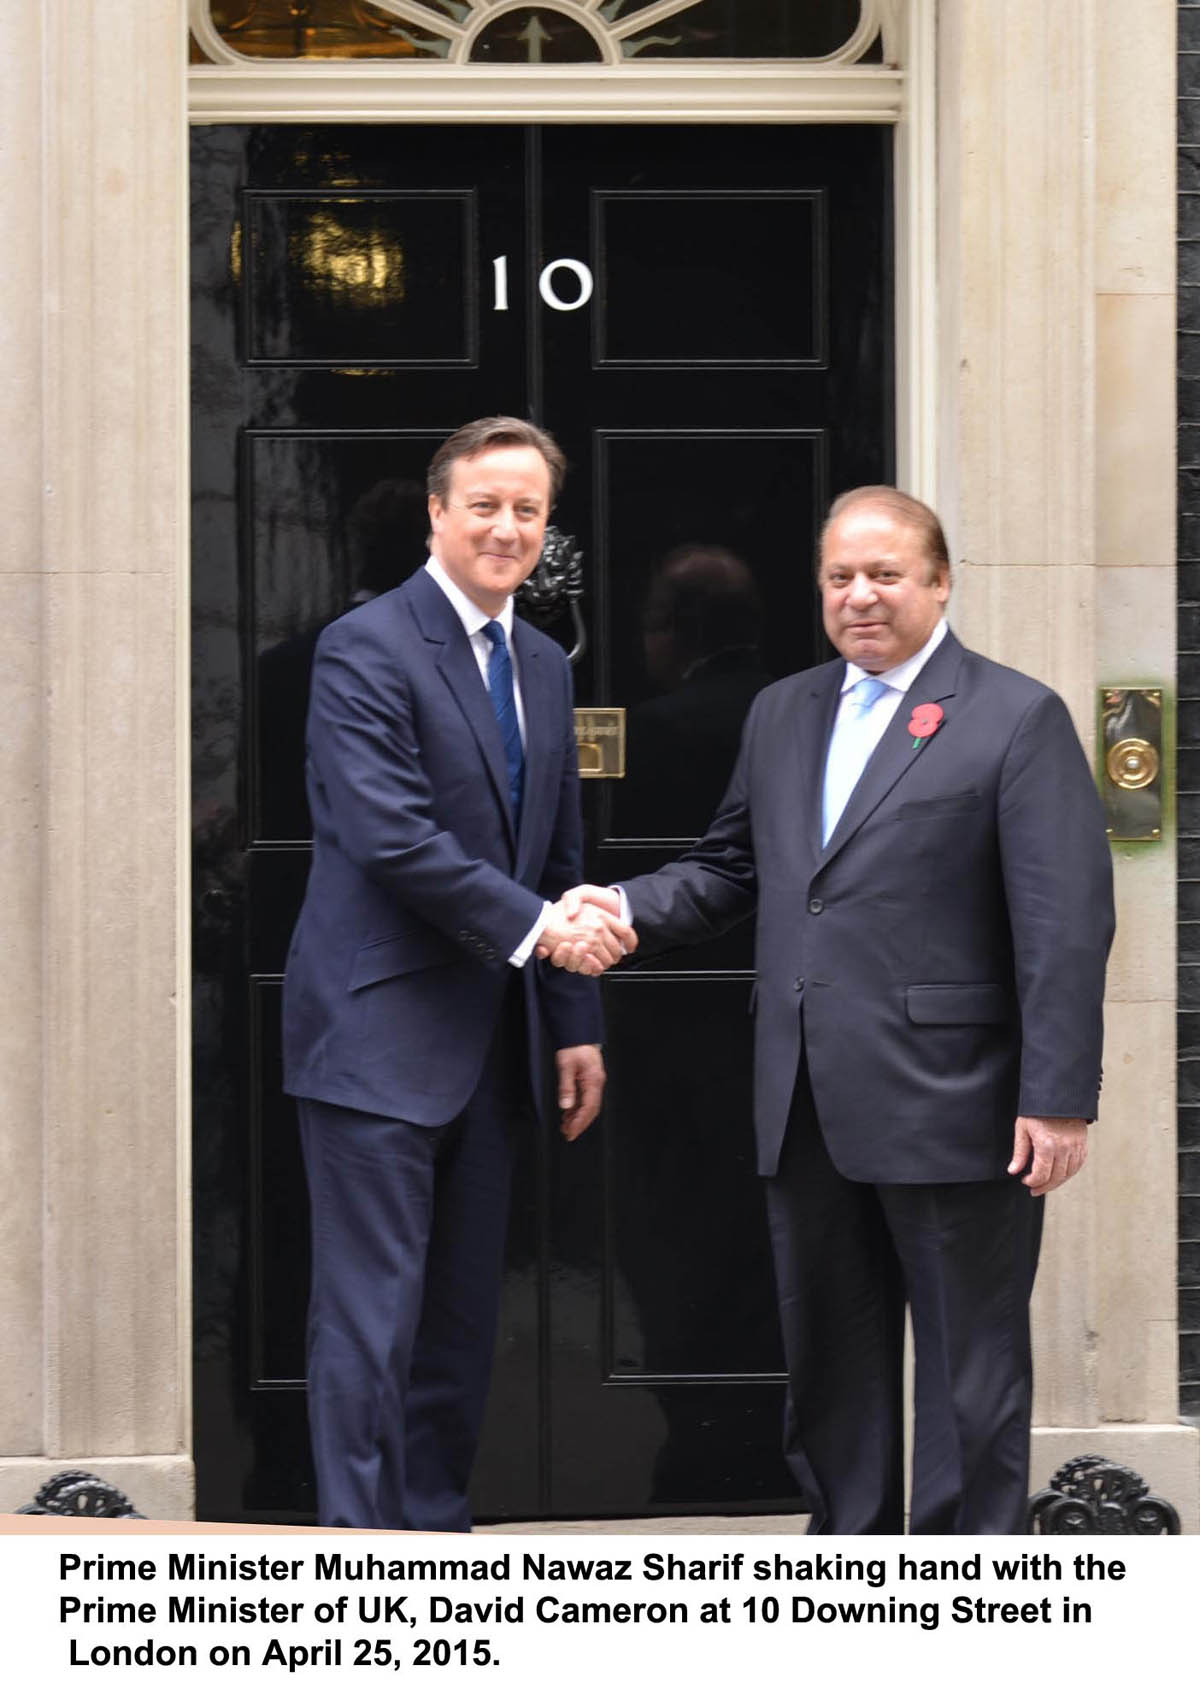 prime minister nawaz sharif right shakes hands with his british counterpart david cameron left outside 10 downing street in london photo pid